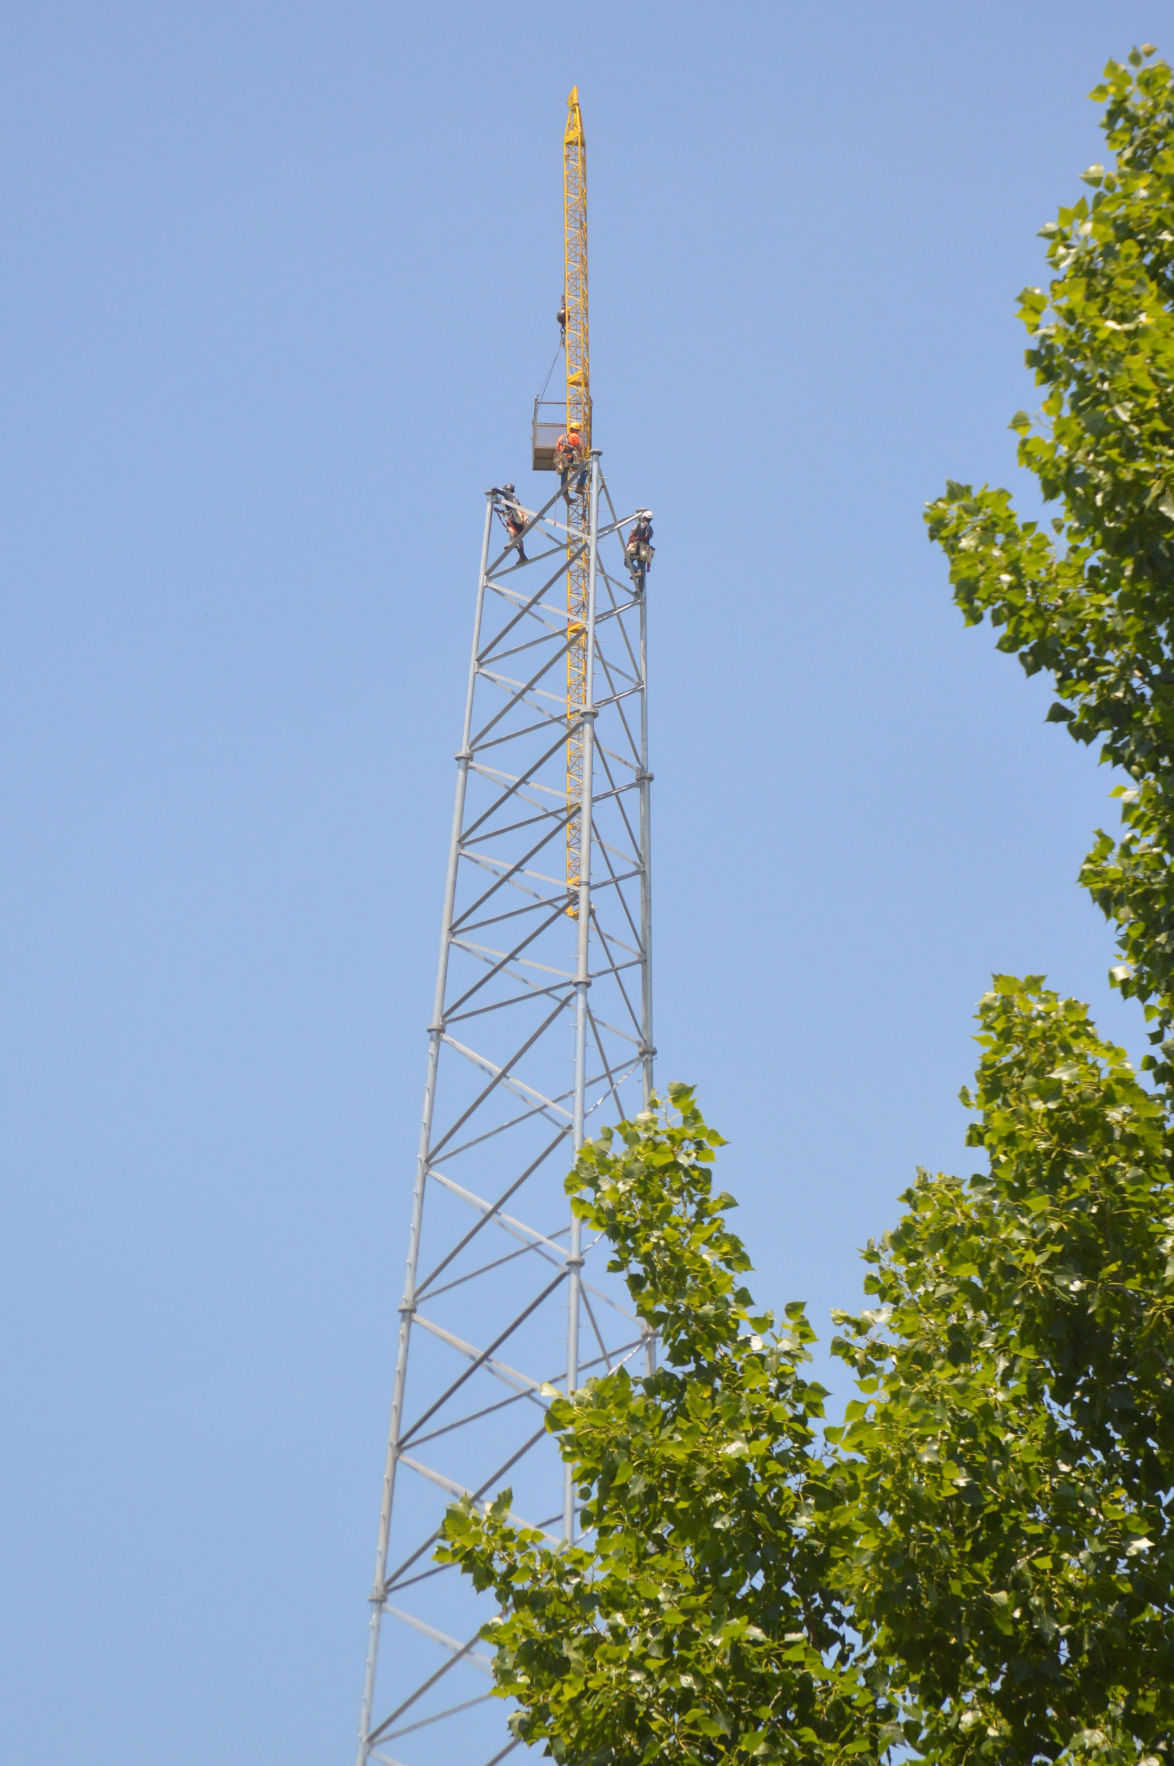 HELLO? HELLO? Cell tower under construction in Salem community Local News enewscourier